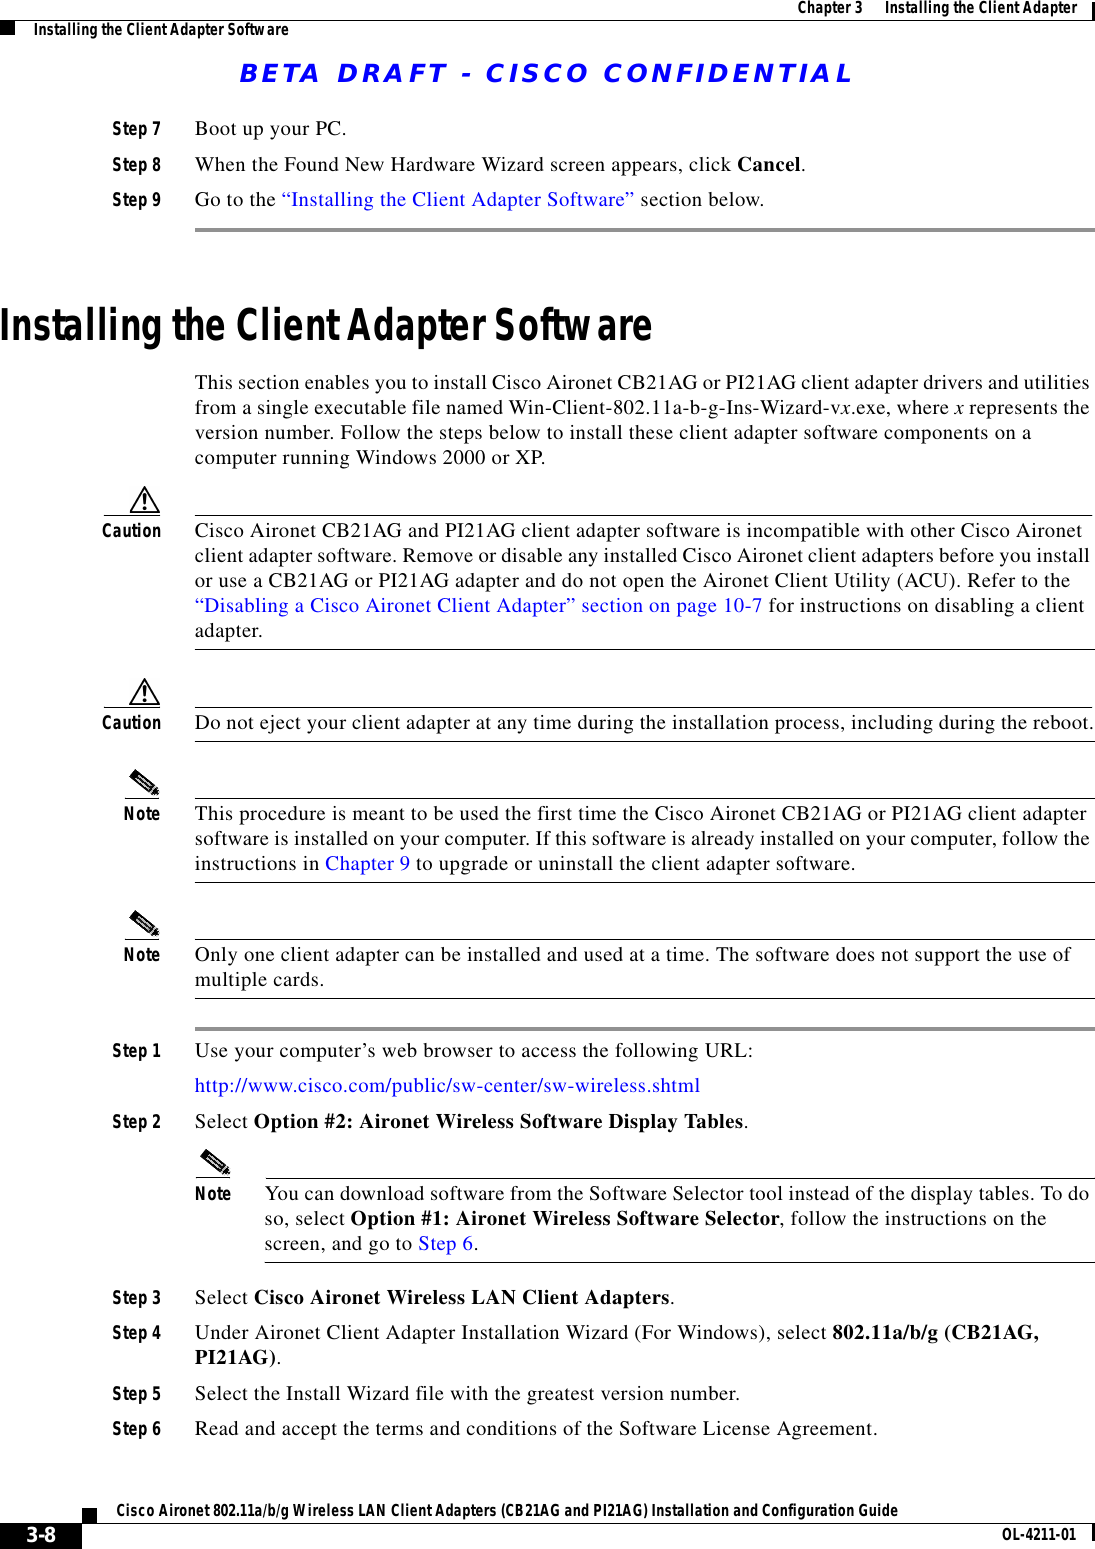 BETA DRAFT - CISCO CONFIDENTIAL3-8Cisco Aironet 802.11a/b/g Wireless LAN Client Adapters (CB21AG and PI21AG) Installation and Configuration Guide OL-4211-01Chapter 3      Installing the Client AdapterInstalling the Client Adapter SoftwareStep 7 Boot up your PC.Step 8 When the Found New Hardware Wizard screen appears, click Cancel.Step 9 Go to the “Installing the Client Adapter Software” section below.Installing the Client Adapter SoftwareThis section enables you to install Cisco Aironet CB21AG or PI21AG client adapter drivers and utilities from a single executable file named Win-Client-802.11a-b-g-Ins-Wizard-vx.exe, where x represents the version number. Follow the steps below to install these client adapter software components on a computer running Windows 2000 or XP.Caution Cisco Aironet CB21AG and PI21AG client adapter software is incompatible with other Cisco Aironet client adapter software. Remove or disable any installed Cisco Aironet client adapters before you install or use a CB21AG or PI21AG adapter and do not open the Aironet Client Utility (ACU). Refer to the “Disabling a Cisco Aironet Client Adapter” section on page 10-7 for instructions on disabling a client adapter.Caution Do not eject your client adapter at any time during the installation process, including during the reboot.Note This procedure is meant to be used the first time the Cisco Aironet CB21AG or PI21AG client adapter software is installed on your computer. If this software is already installed on your computer, follow the instructions in Chapter 9 to upgrade or uninstall the client adapter software.Note Only one client adapter can be installed and used at a time. The software does not support the use of multiple cards.Step 1 Use your computer’s web browser to access the following URL:http://www.cisco.com/public/sw-center/sw-wireless.shtmlStep 2 Select Option #2: Aironet Wireless Software Display Tables.Note You can download software from the Software Selector tool instead of the display tables. To do so, select Option #1: Aironet Wireless Software Selector, follow the instructions on the screen, and go to Step 6.Step 3 Select Cisco Aironet Wireless LAN Client Adapters.Step 4 Under Aironet Client Adapter Installation Wizard (For Windows), select 802.11a/b/g (CB21AG, PI21AG).Step 5 Select the Install Wizard file with the greatest version number.Step 6 Read and accept the terms and conditions of the Software License Agreement.